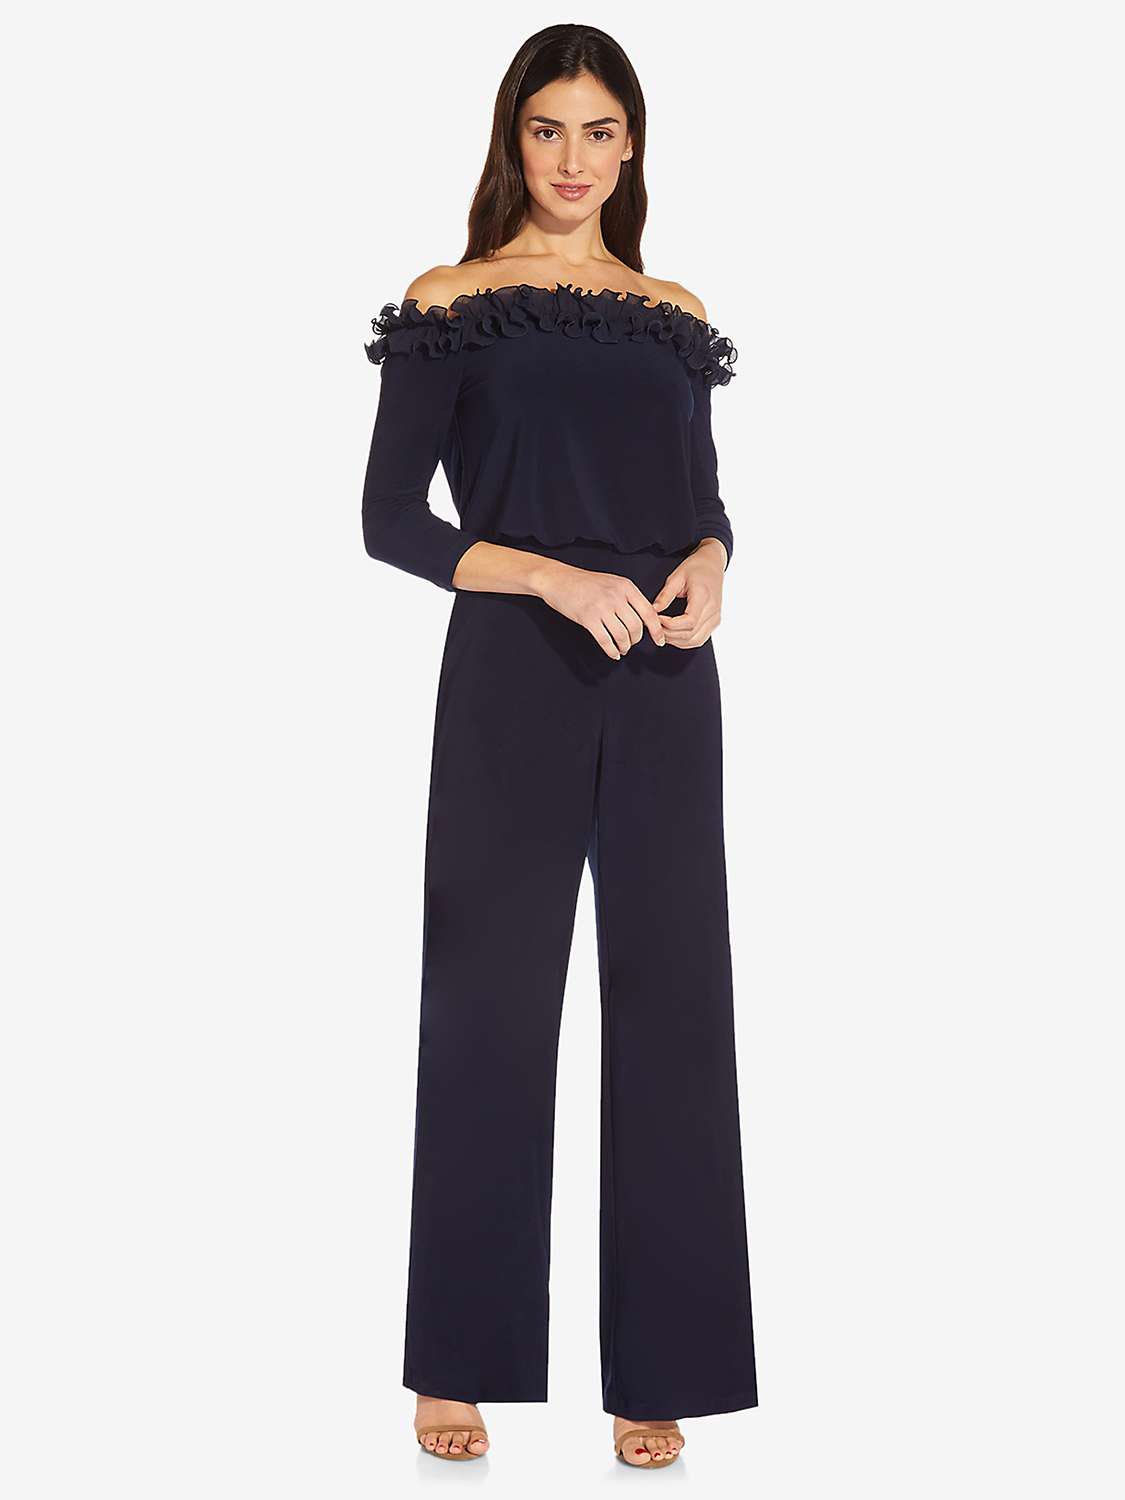 Buy Adrianna Papell Ruffled Blouson Jumpsuit, Navy Online at johnlewis.com